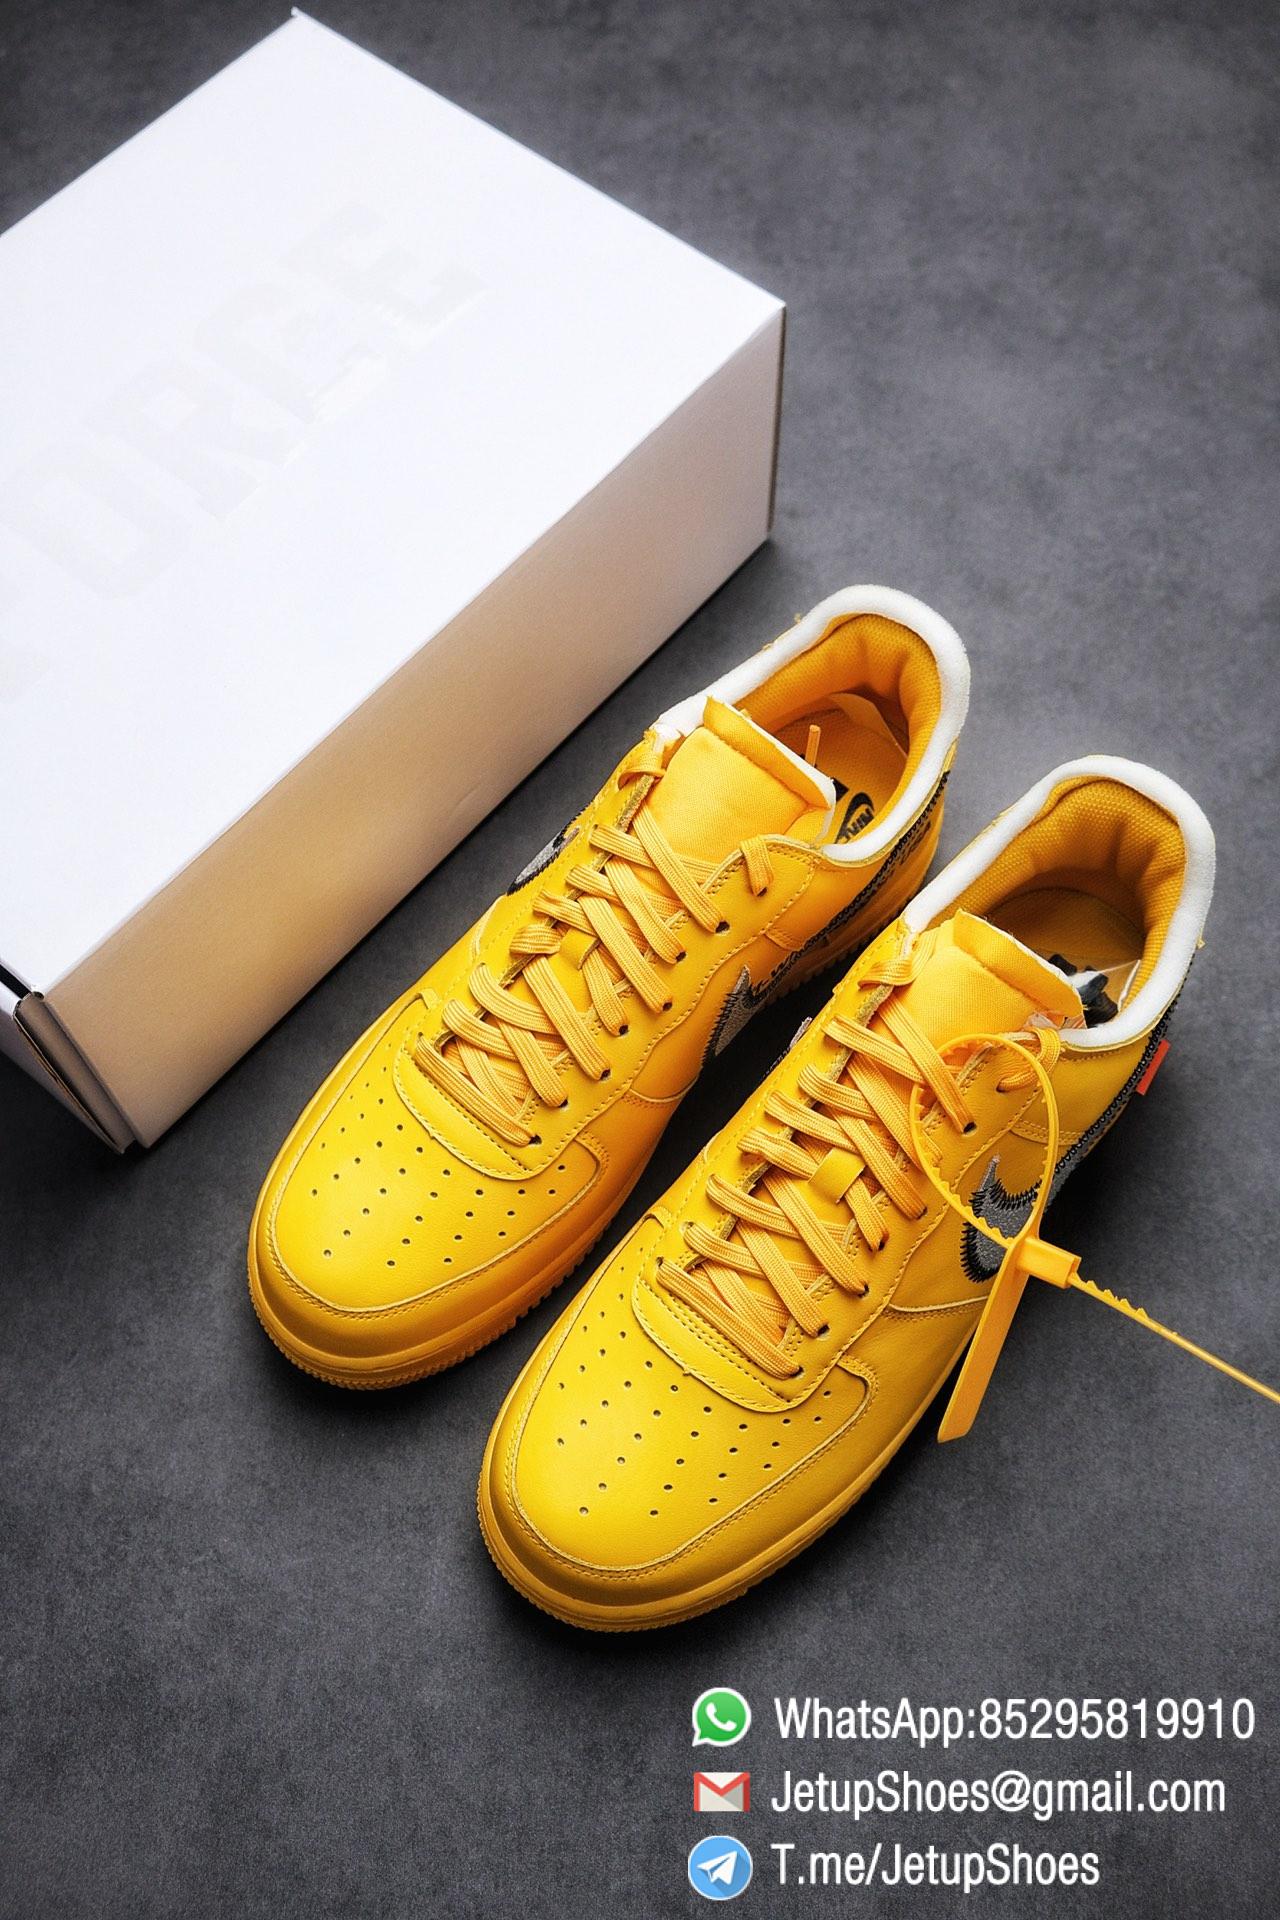 Best Replica Sneakers Off White x Air Force 1 Low University Gold SKU DD1876 700 Top Quality Basketball Shoes 04